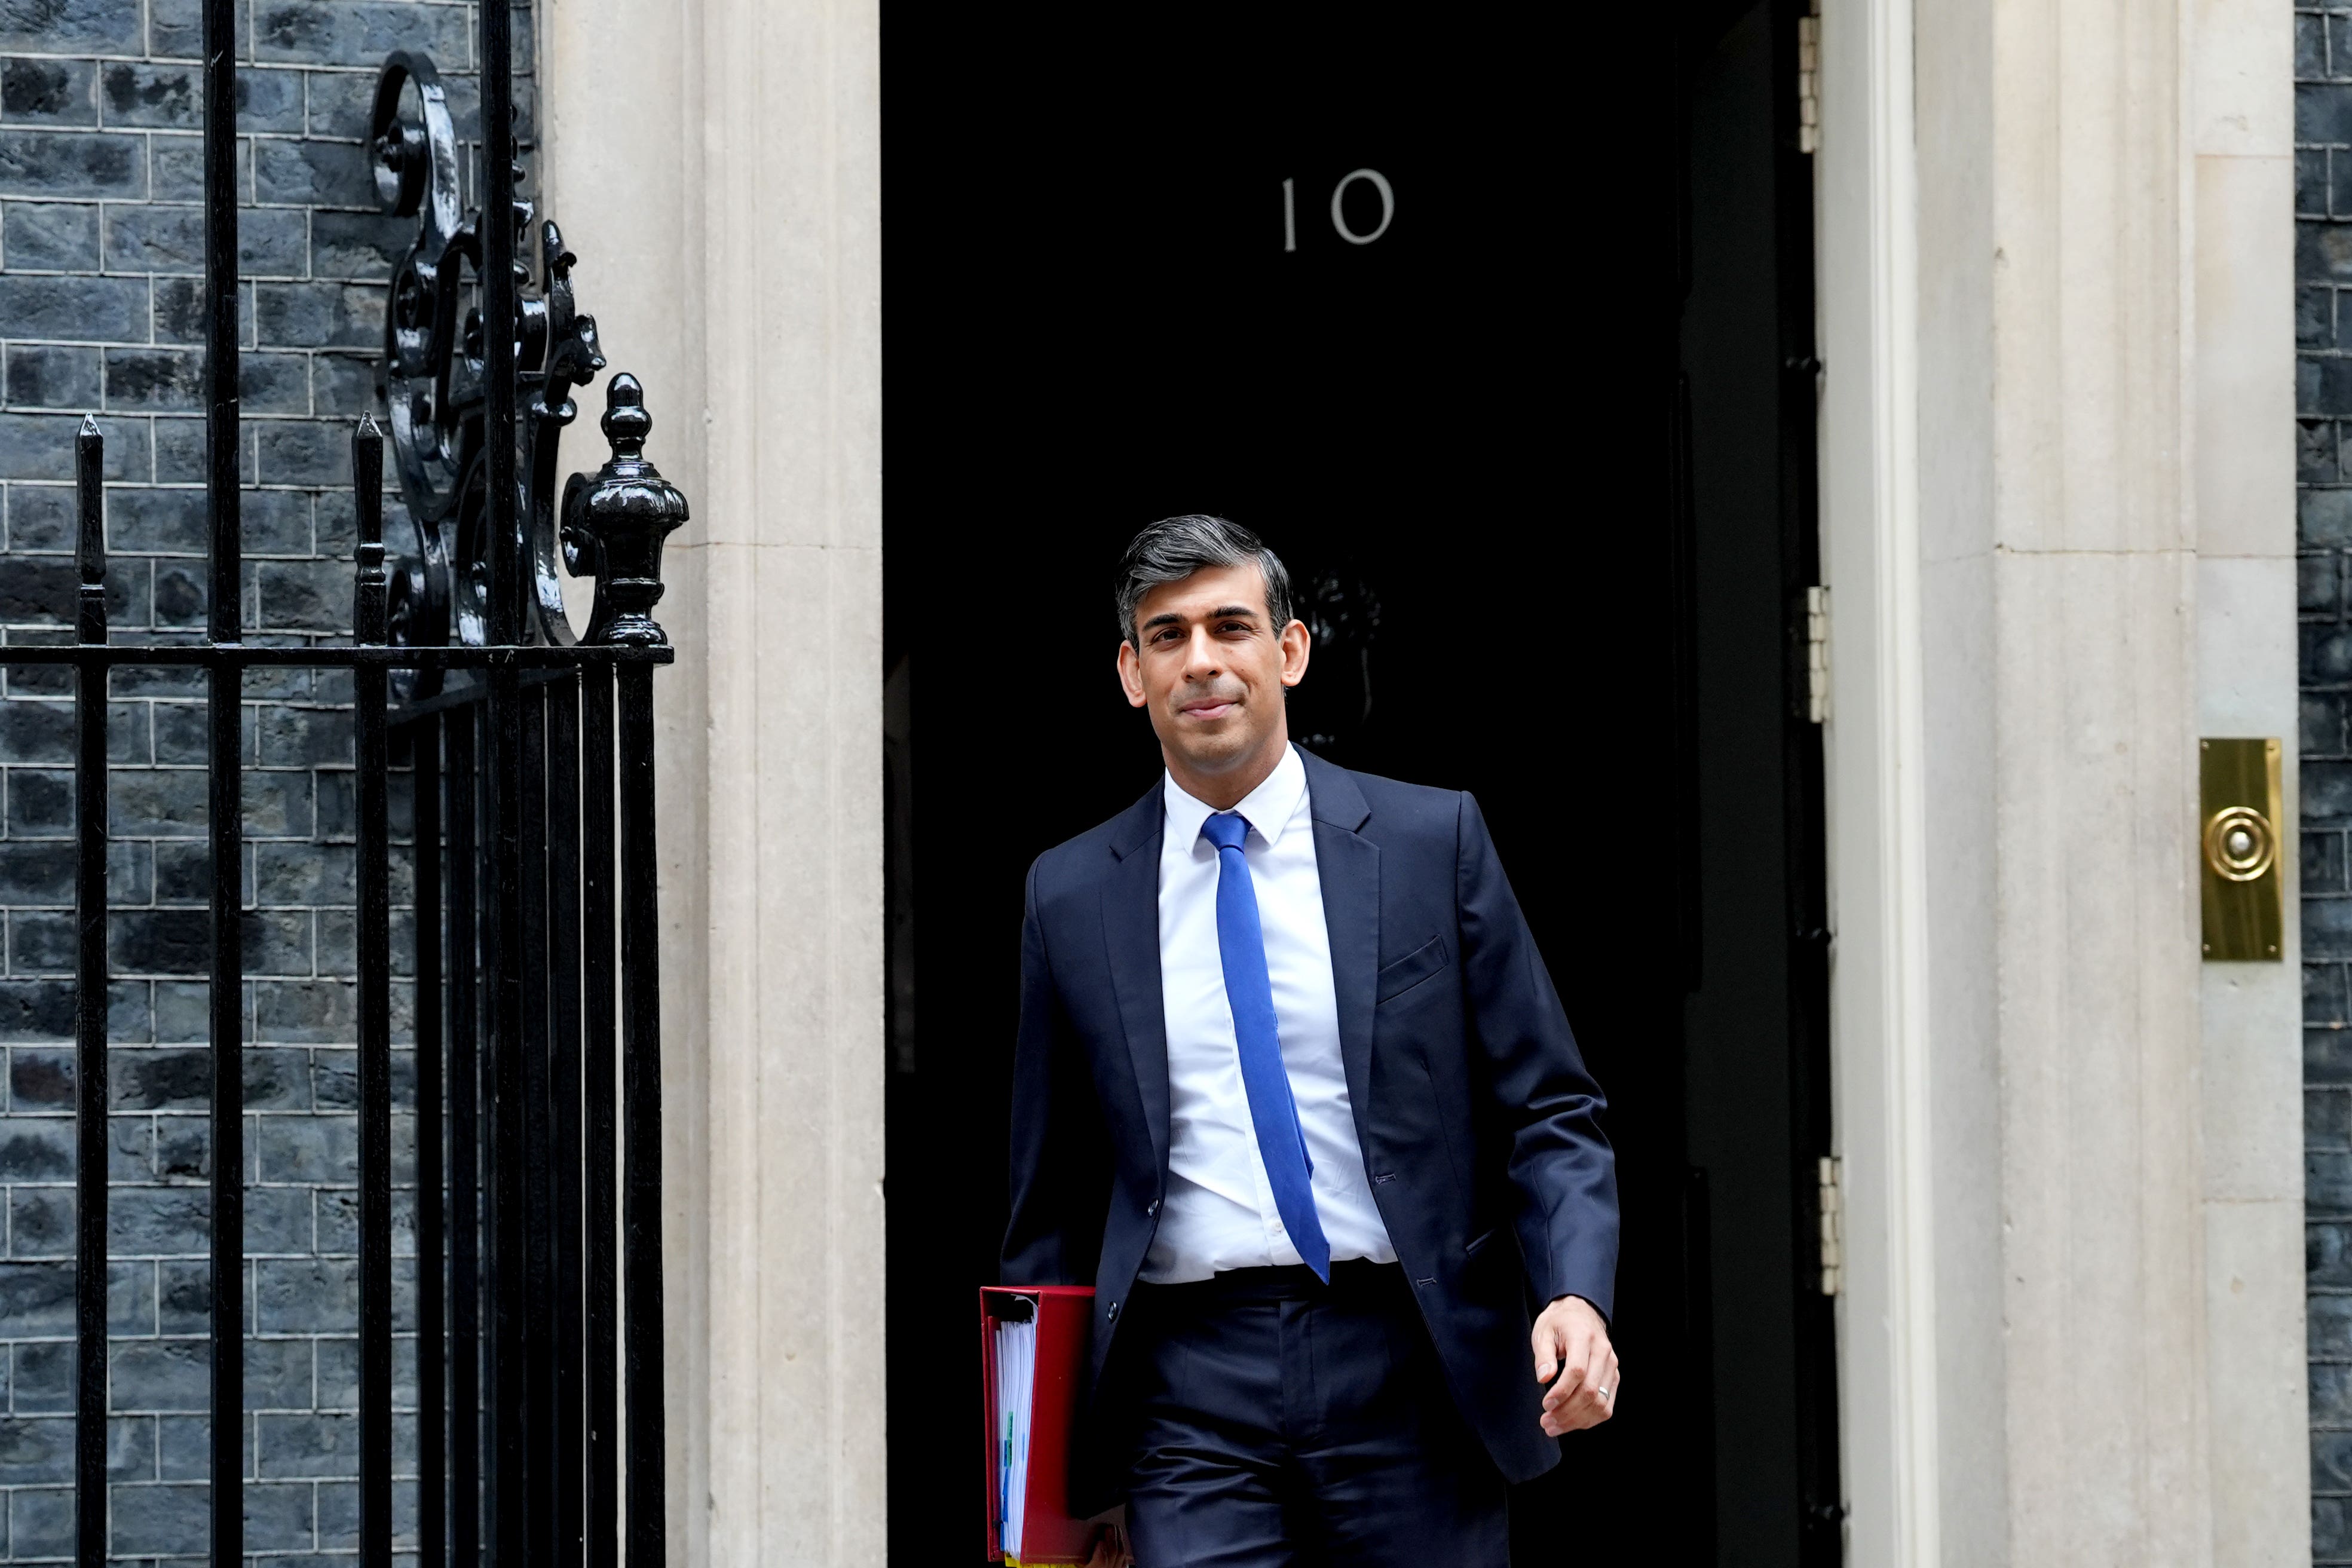 Prime Minister Rishi Sunak departs 10 Downing Street, London, to attend Prime Minister’s Questions at the Houses of Parliament (Stefan Rousseau/PA)